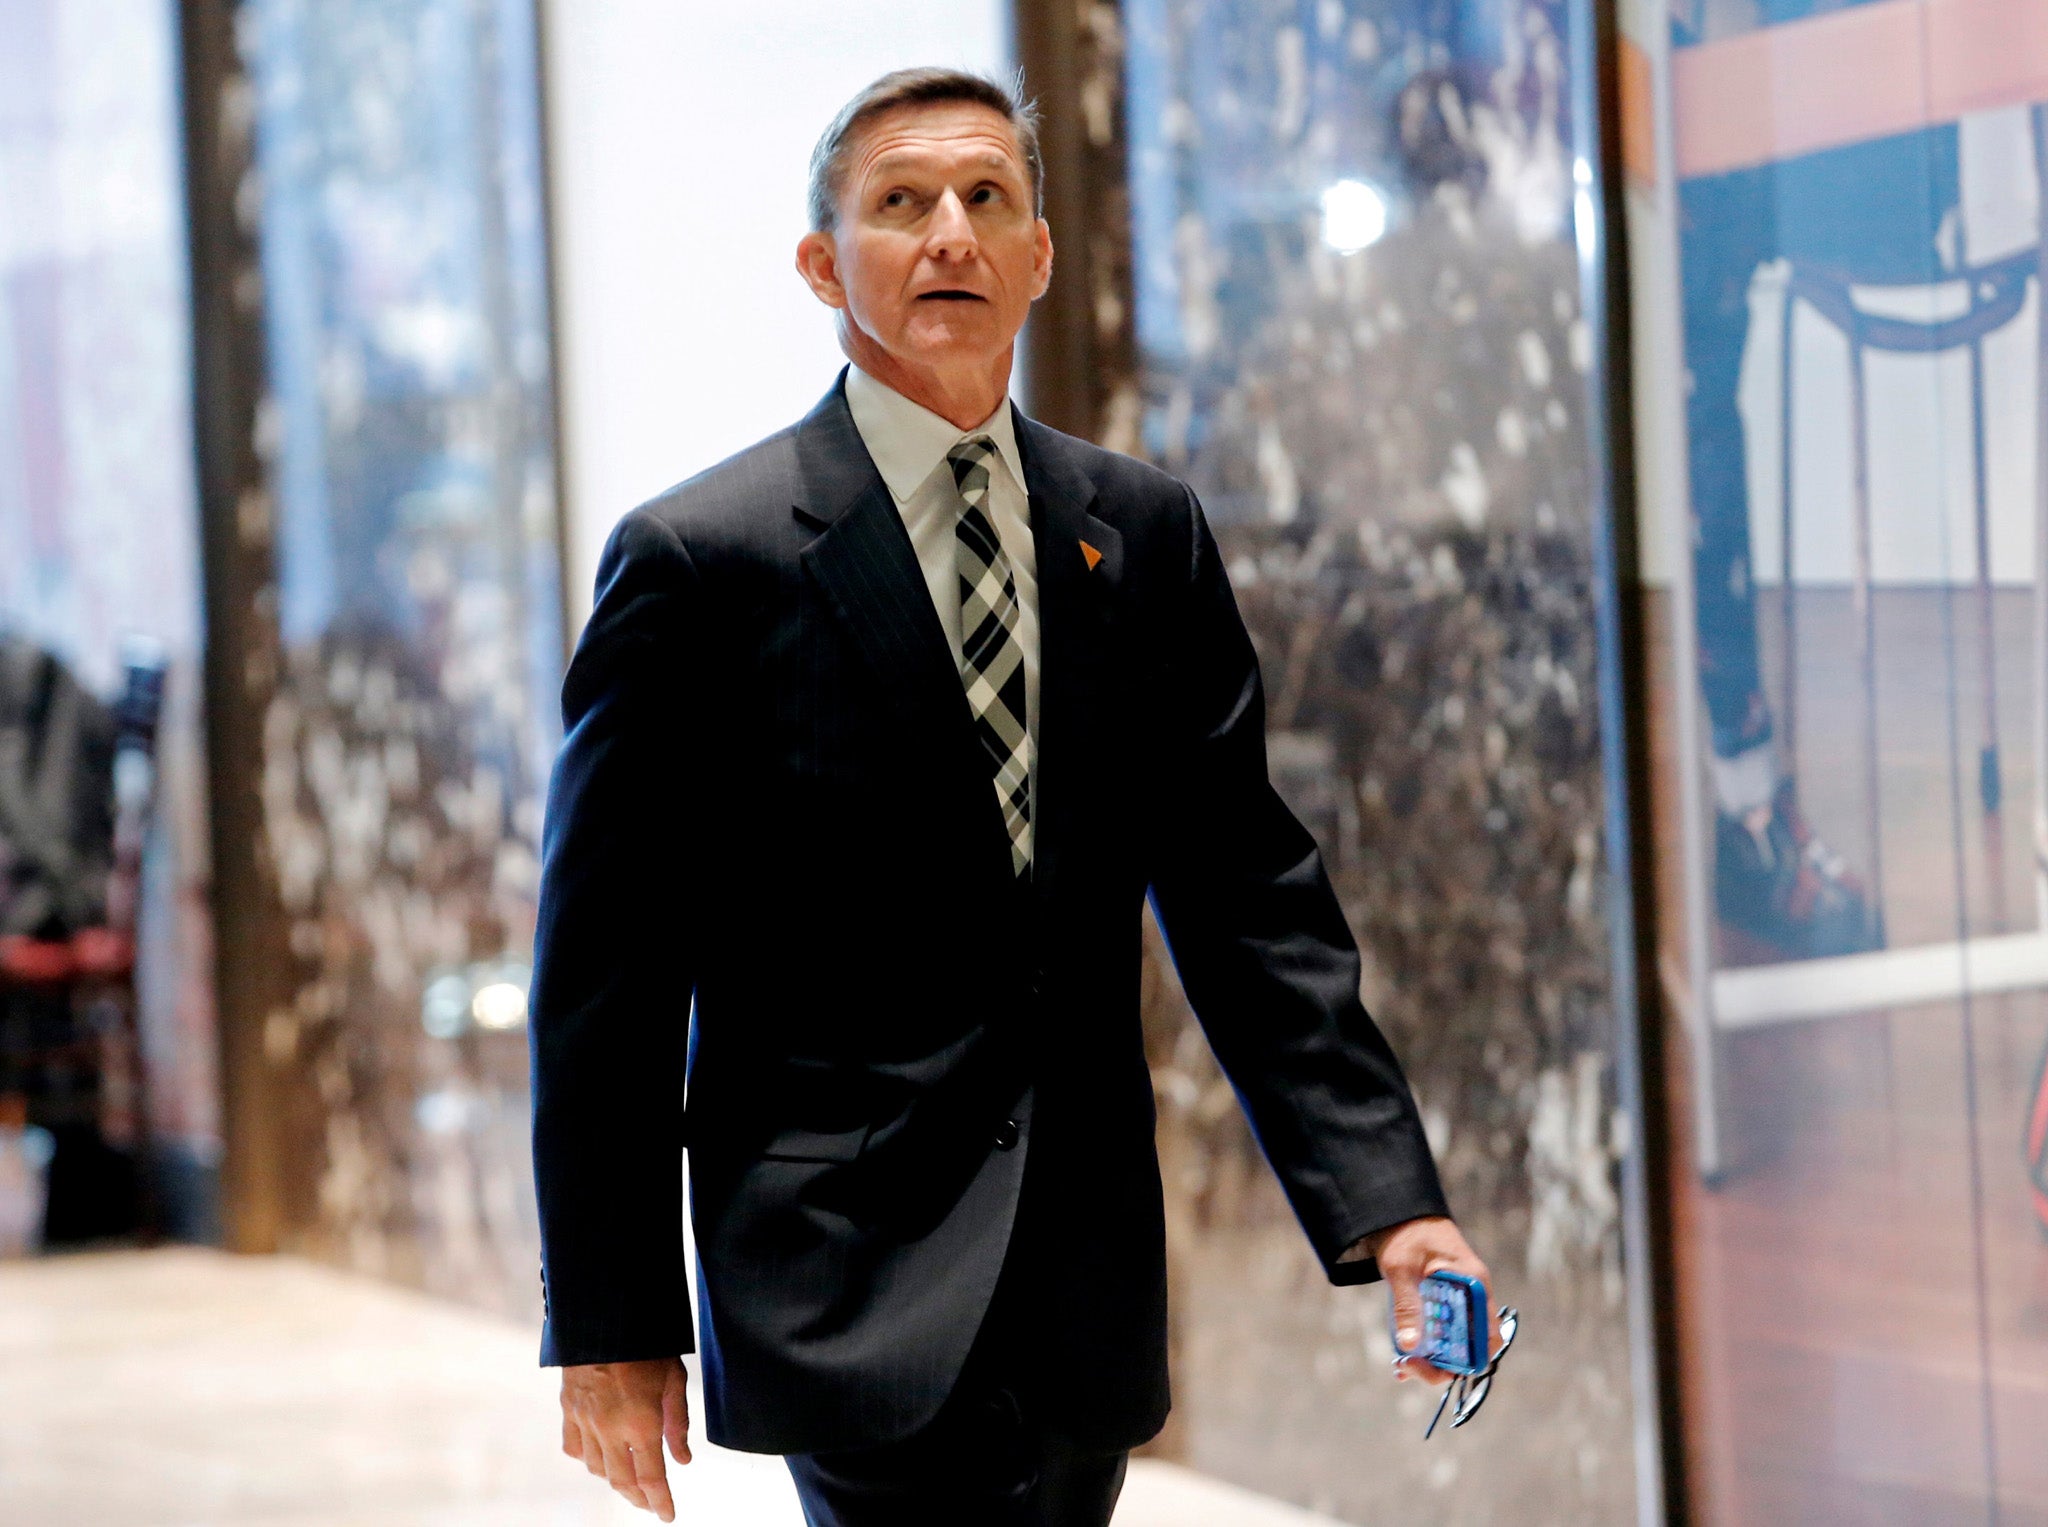 The son of retired US Army Lieutenant General Michael Flynn has been sharing the fake theories on social media